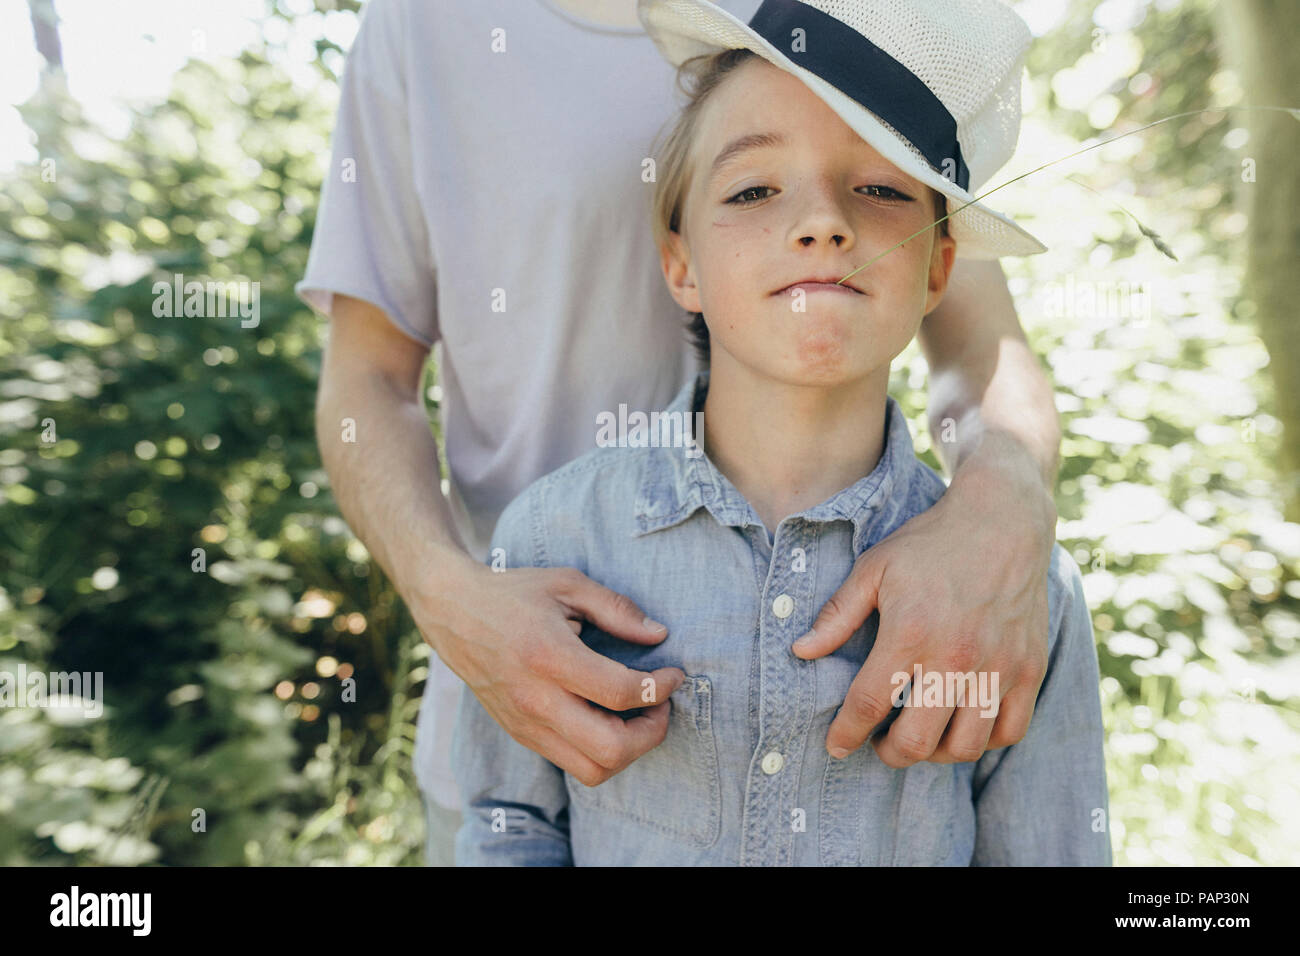 Portrait of boy wearing hat being embraced by a man Stock Photo